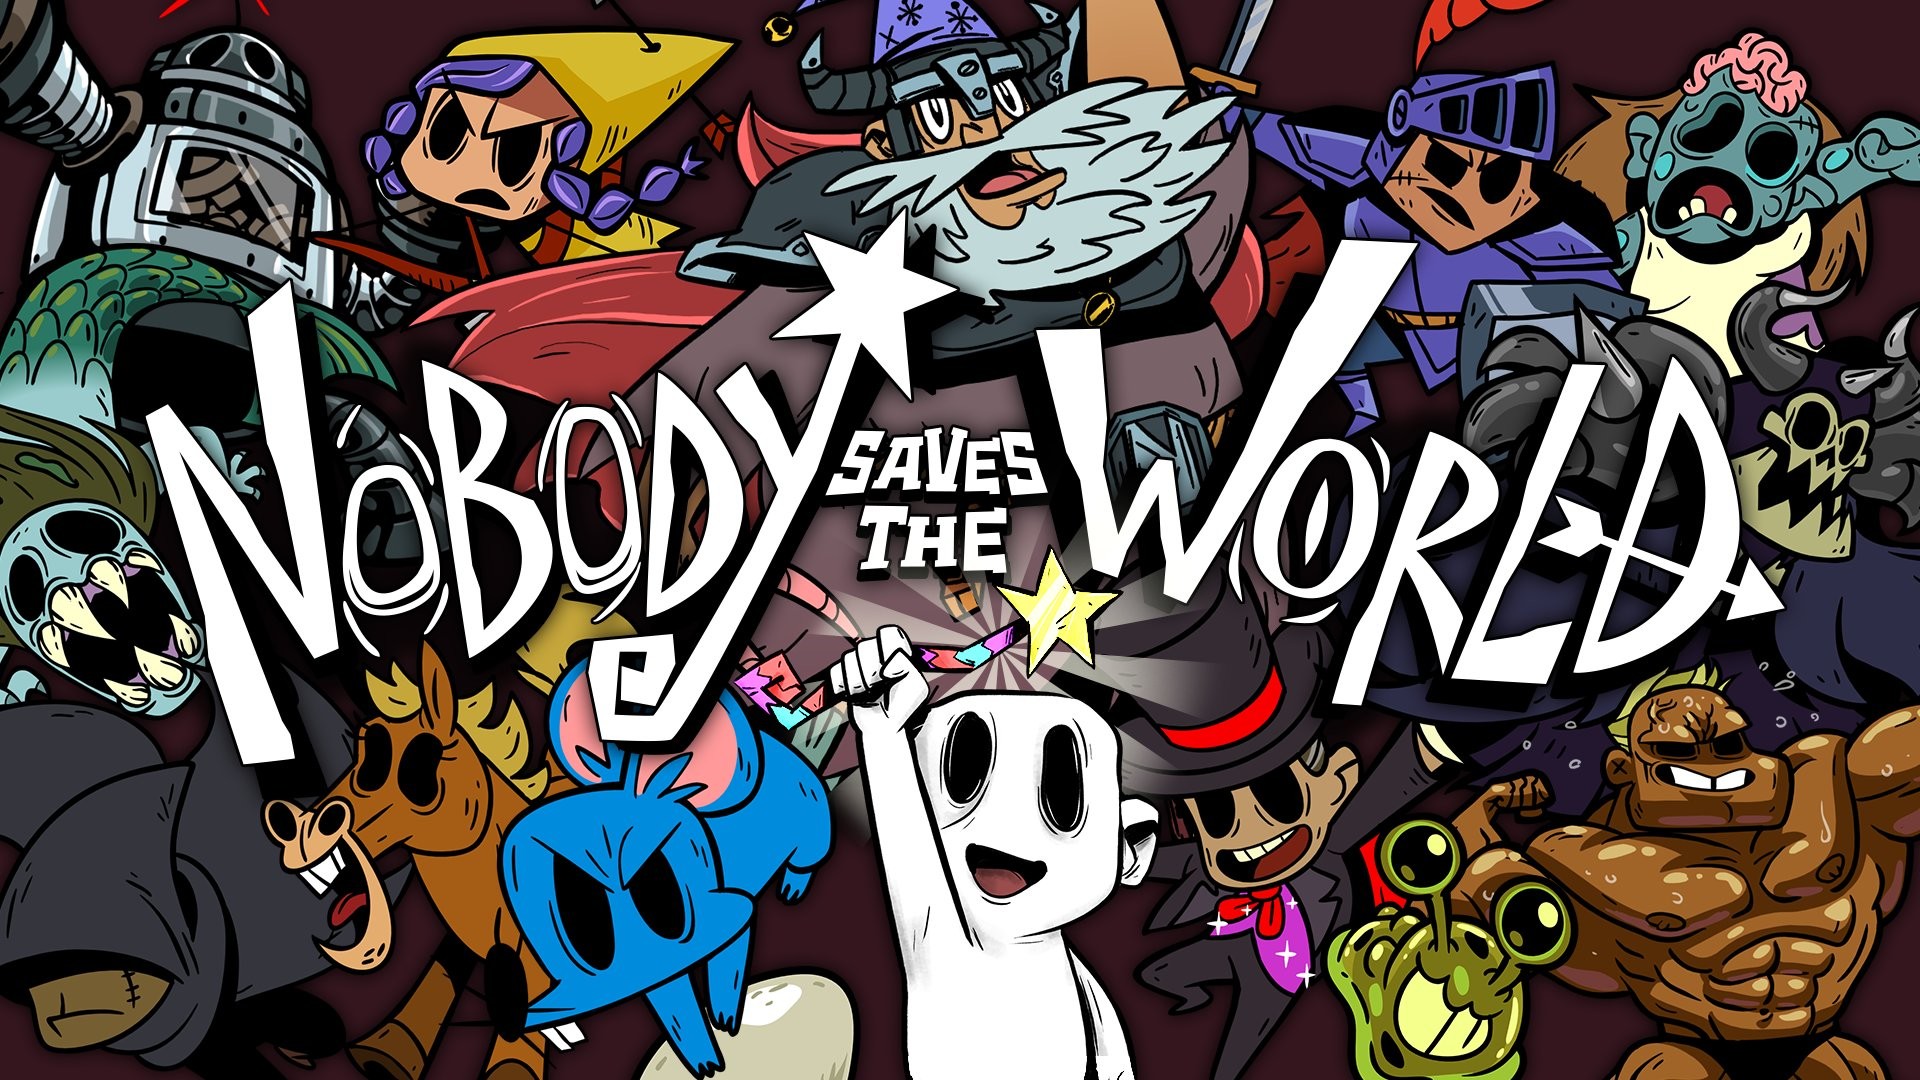 nobody saves the world release date